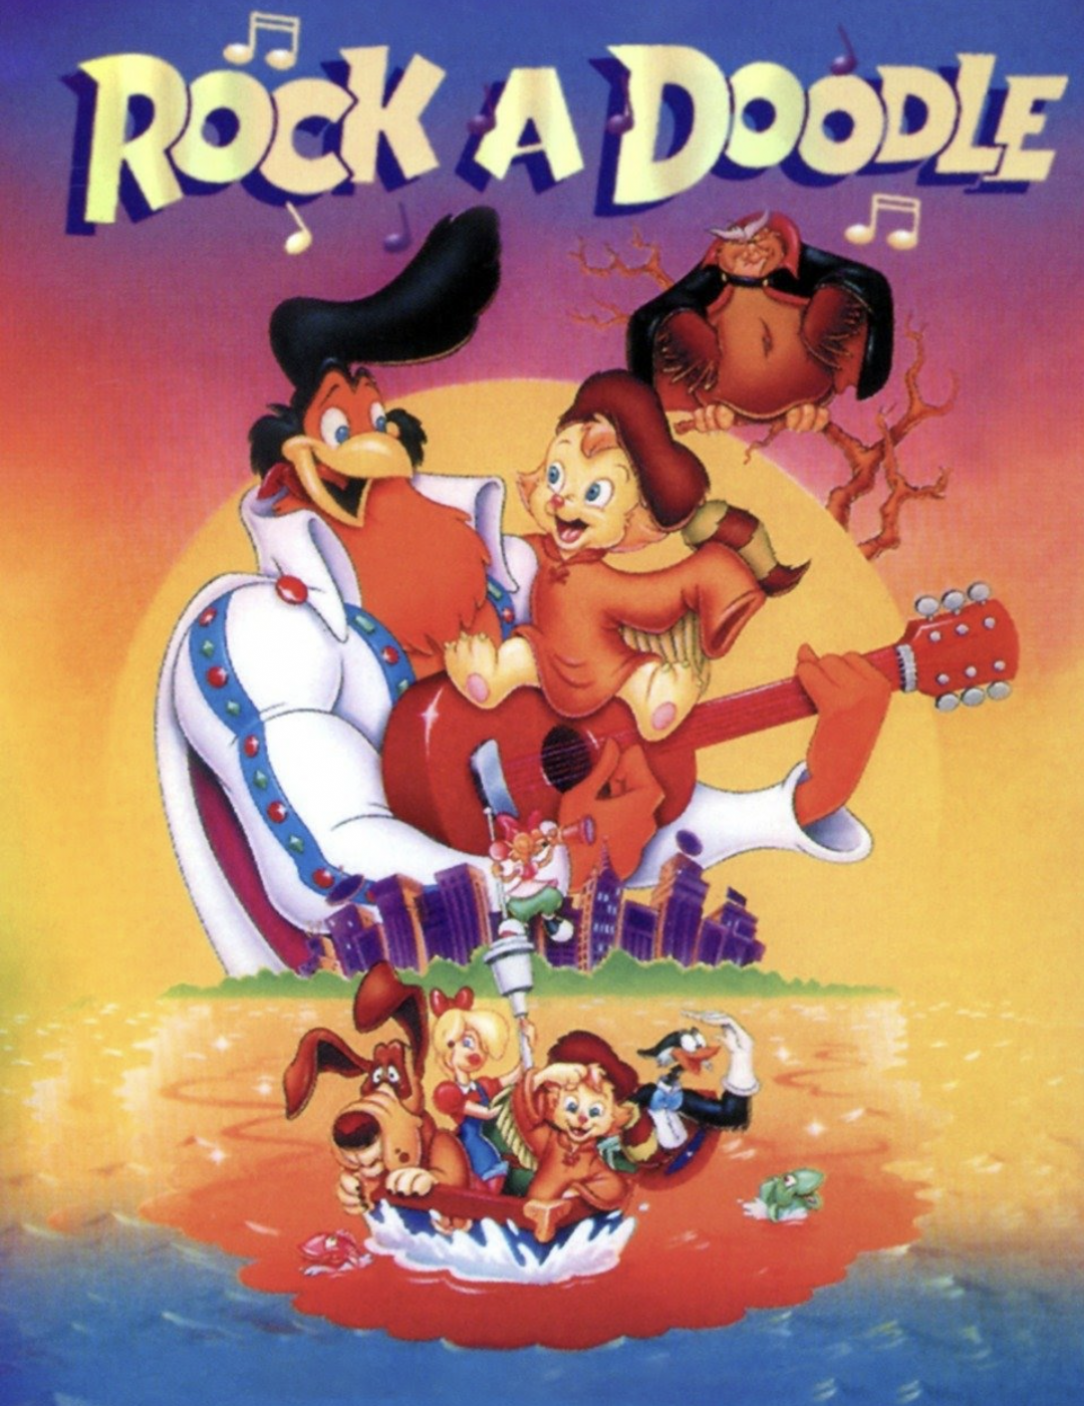 Who remembers Rock A Doodle?